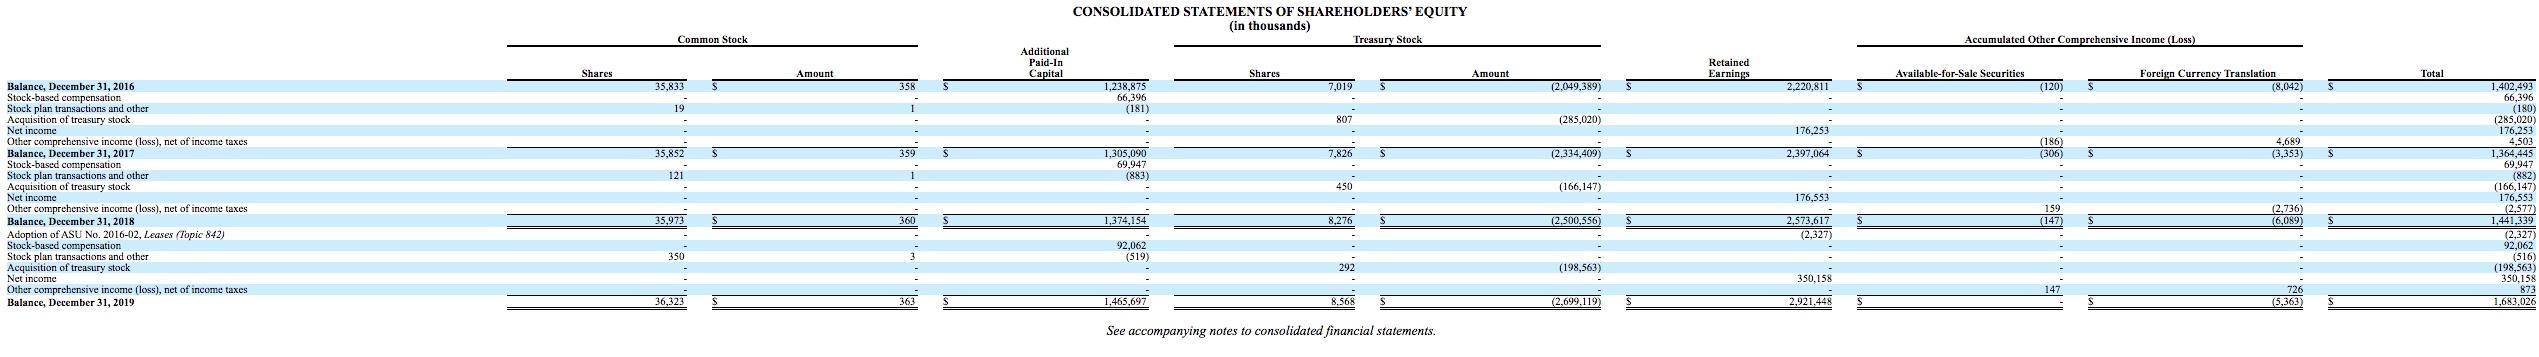 Common Stock Accumulated Other Comprehensive Income (Loss) CONSOLIDATED STATEMENTS OF SHAREHOLDERS EQUITY (in thousands) Tre